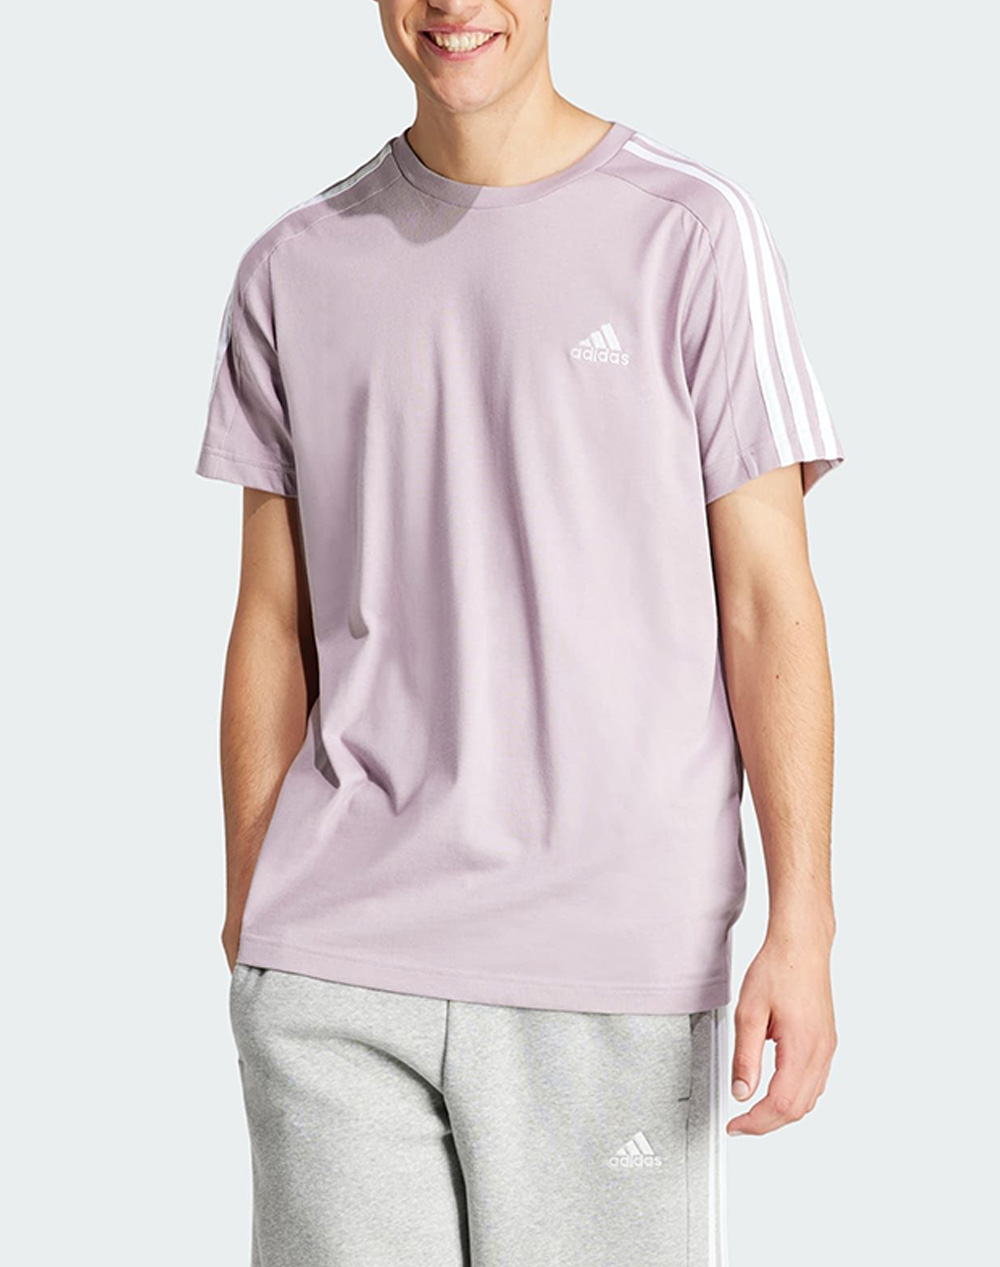 ADIDAS M 3S SJ T IS1331-PINK Lilac